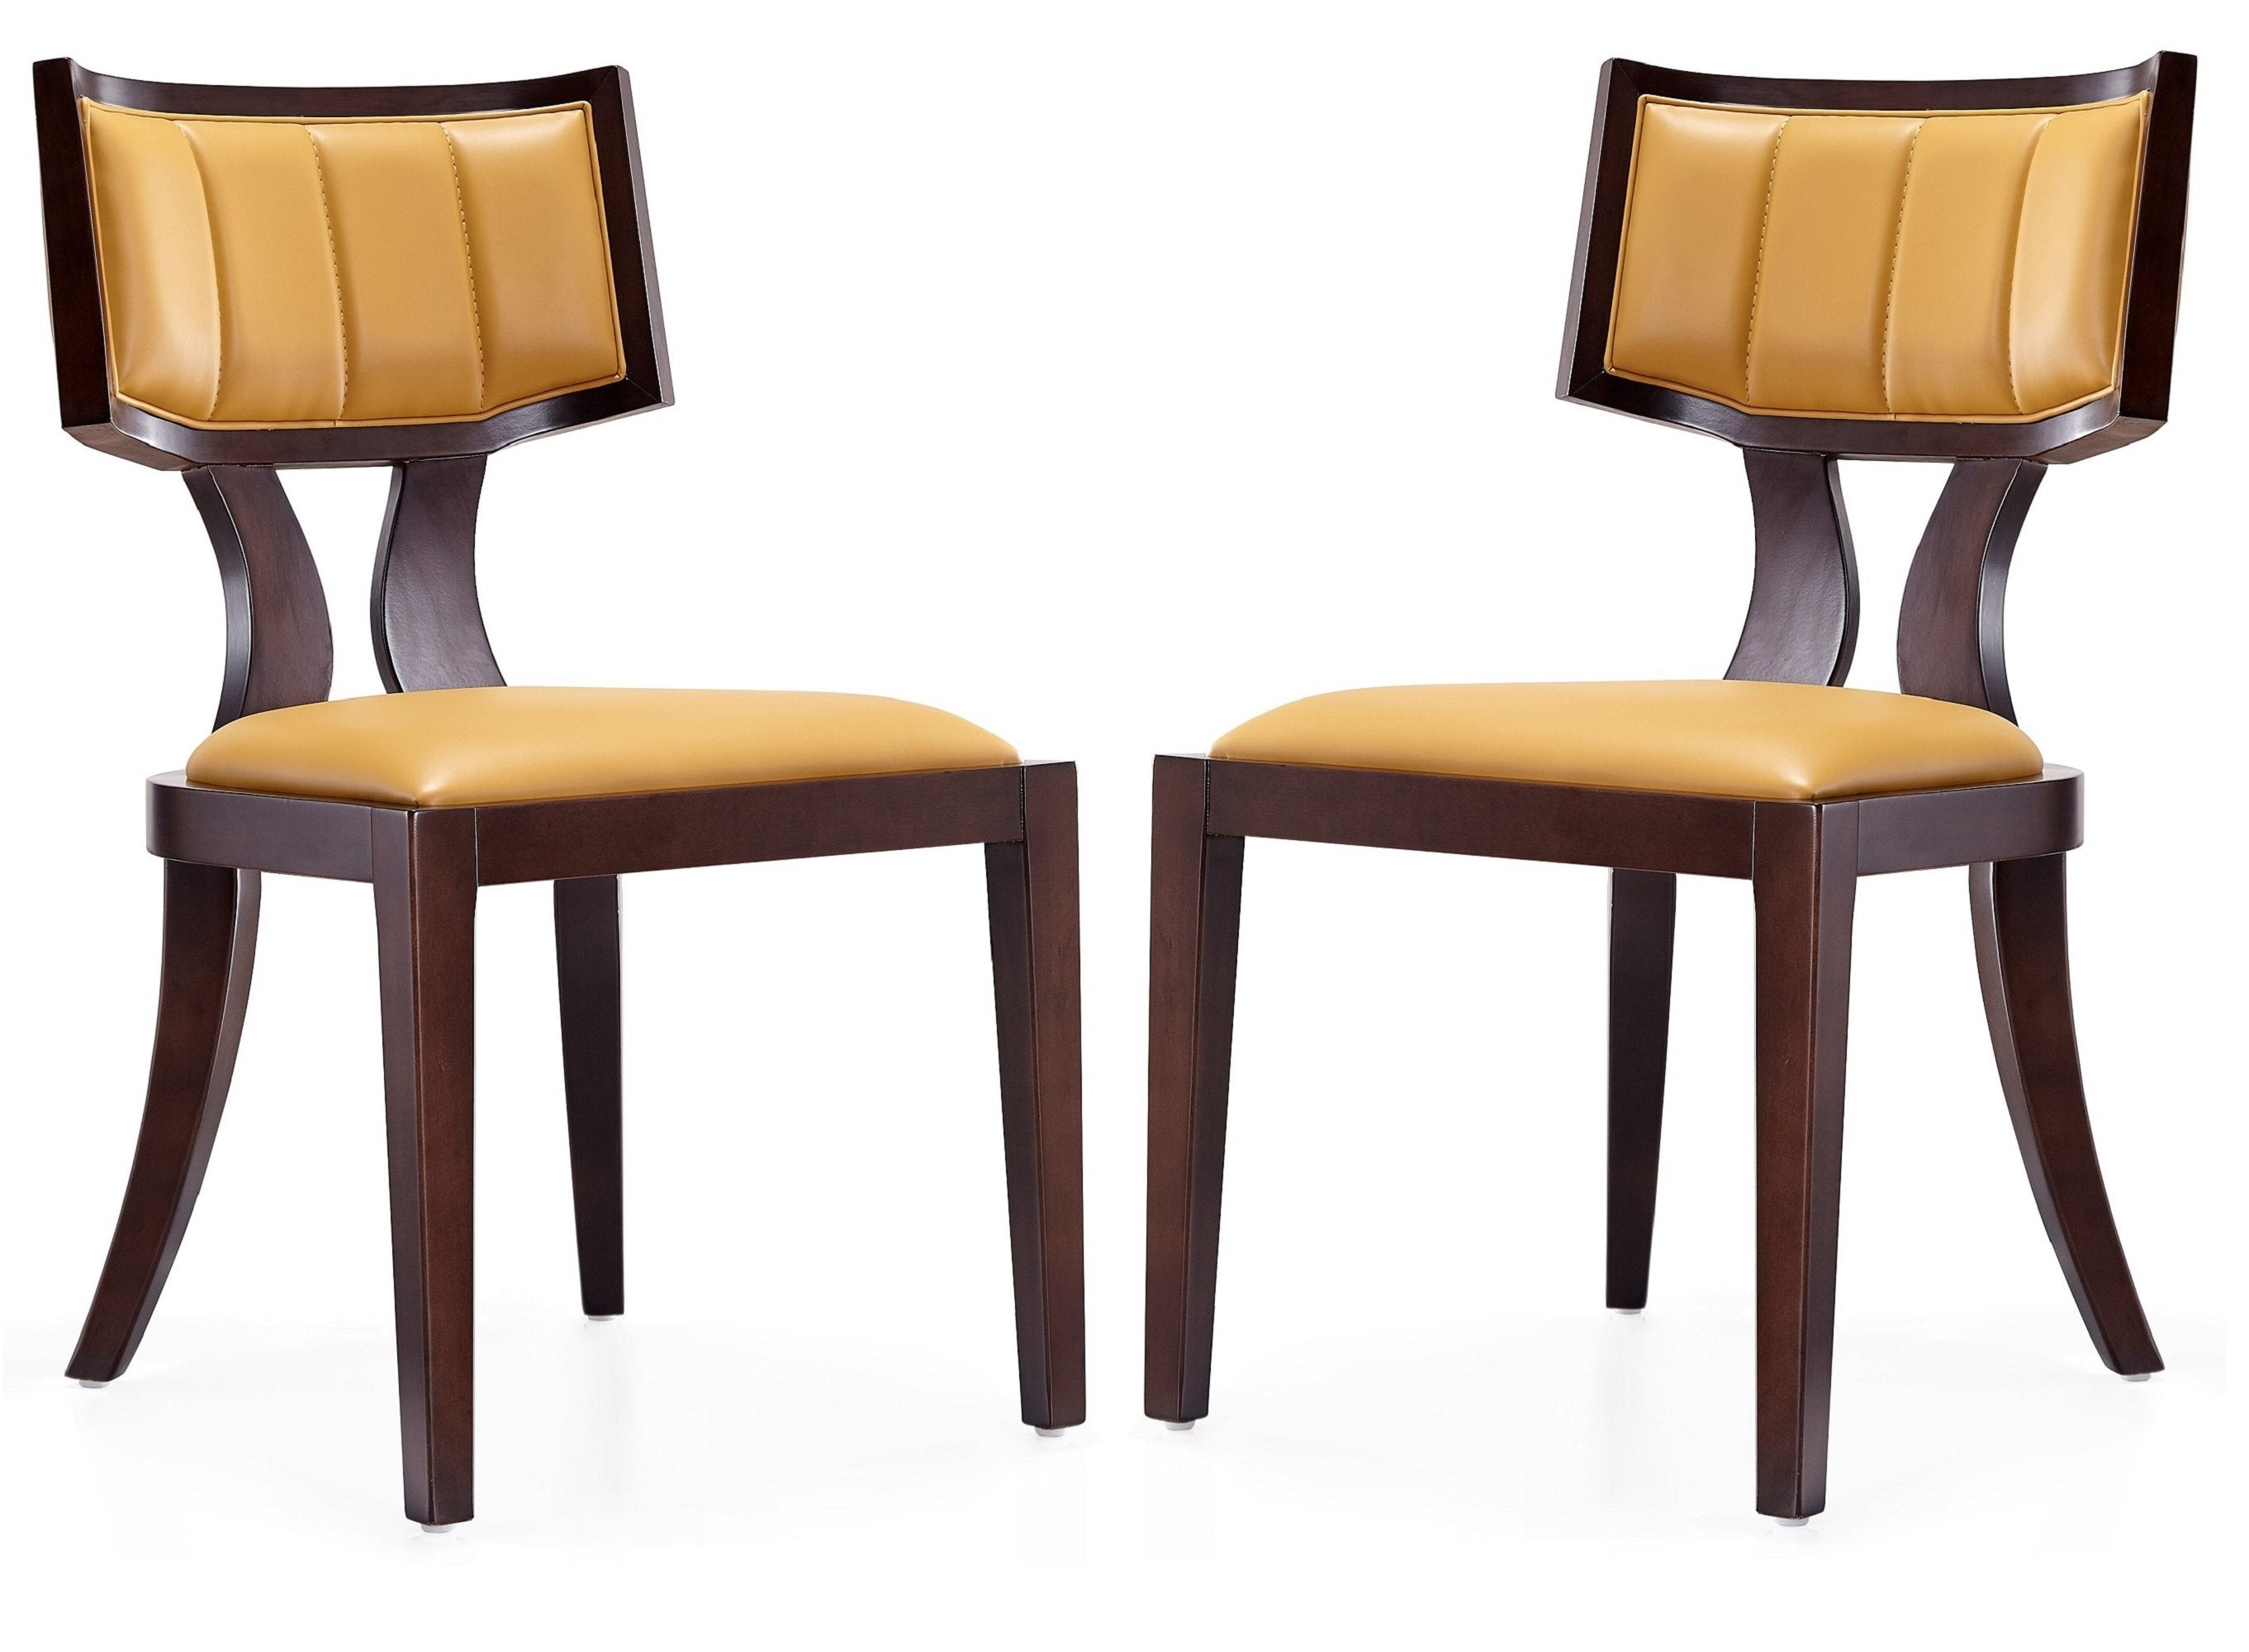 Pulitzer Dining Chair - Set of 2 - East Shore Modern Home Furnishings